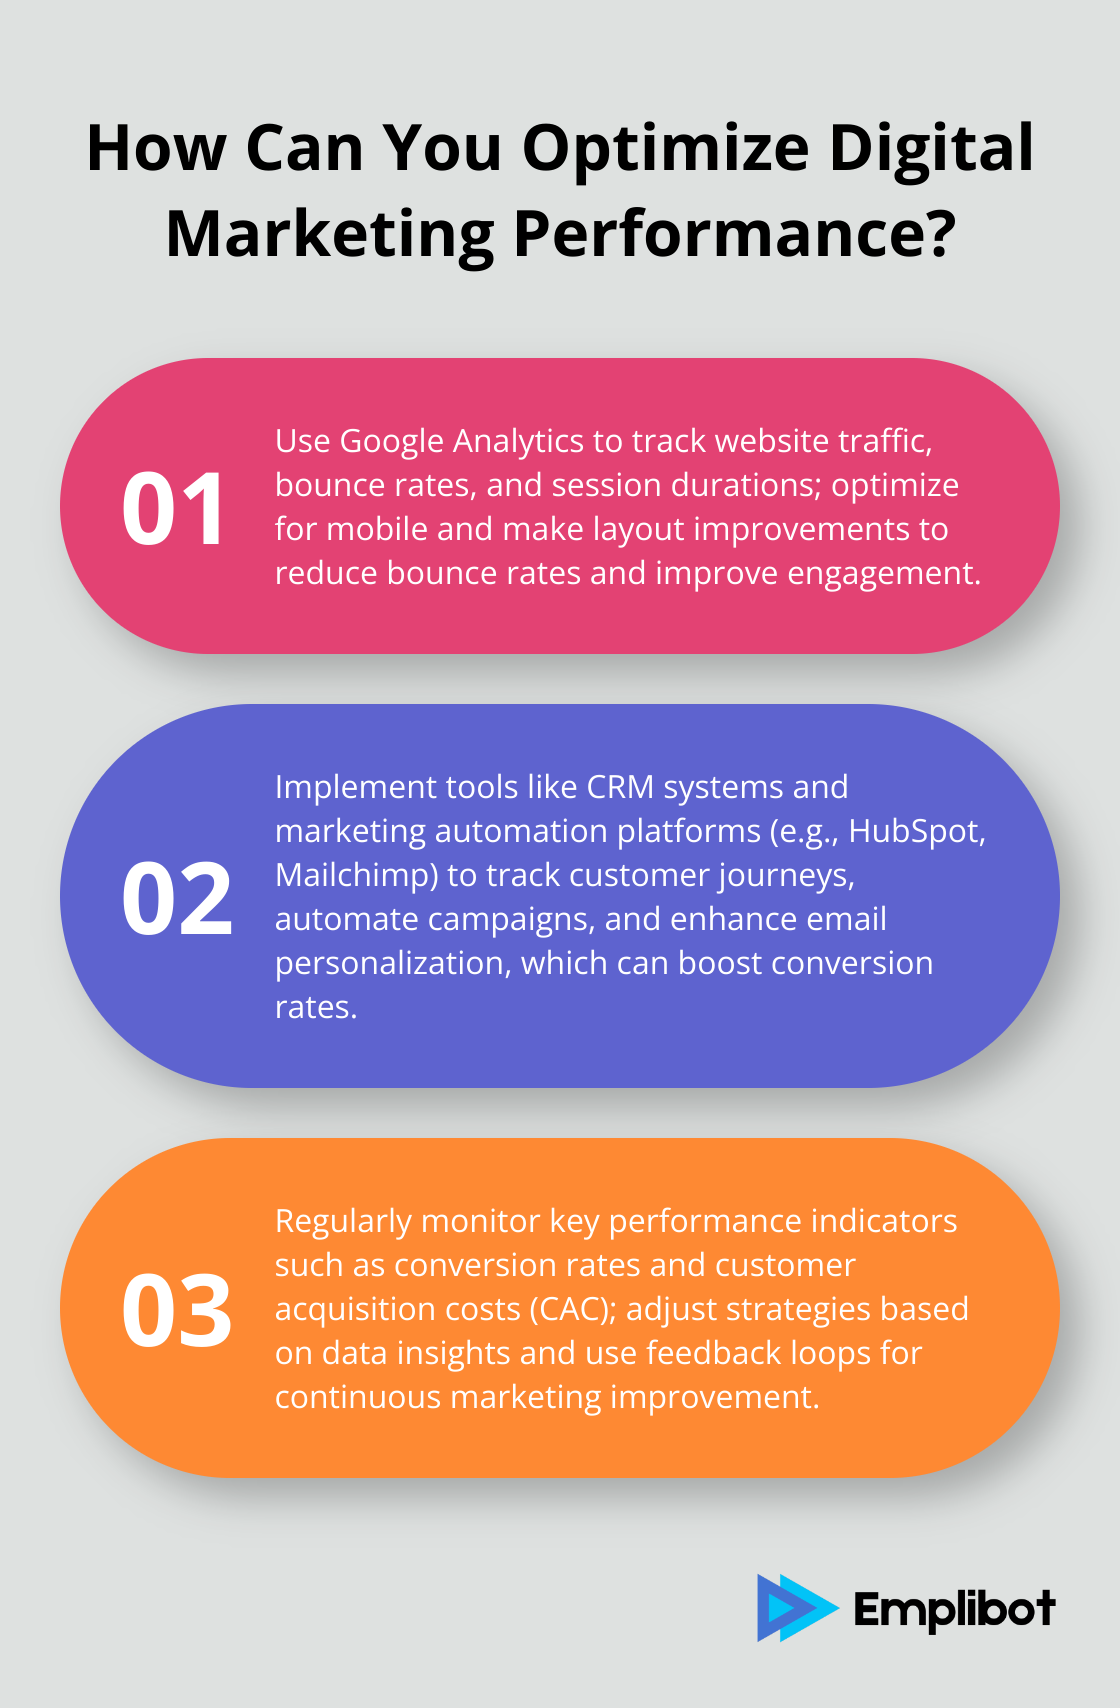 Fact - How Can You Optimize Digital Marketing Performance?